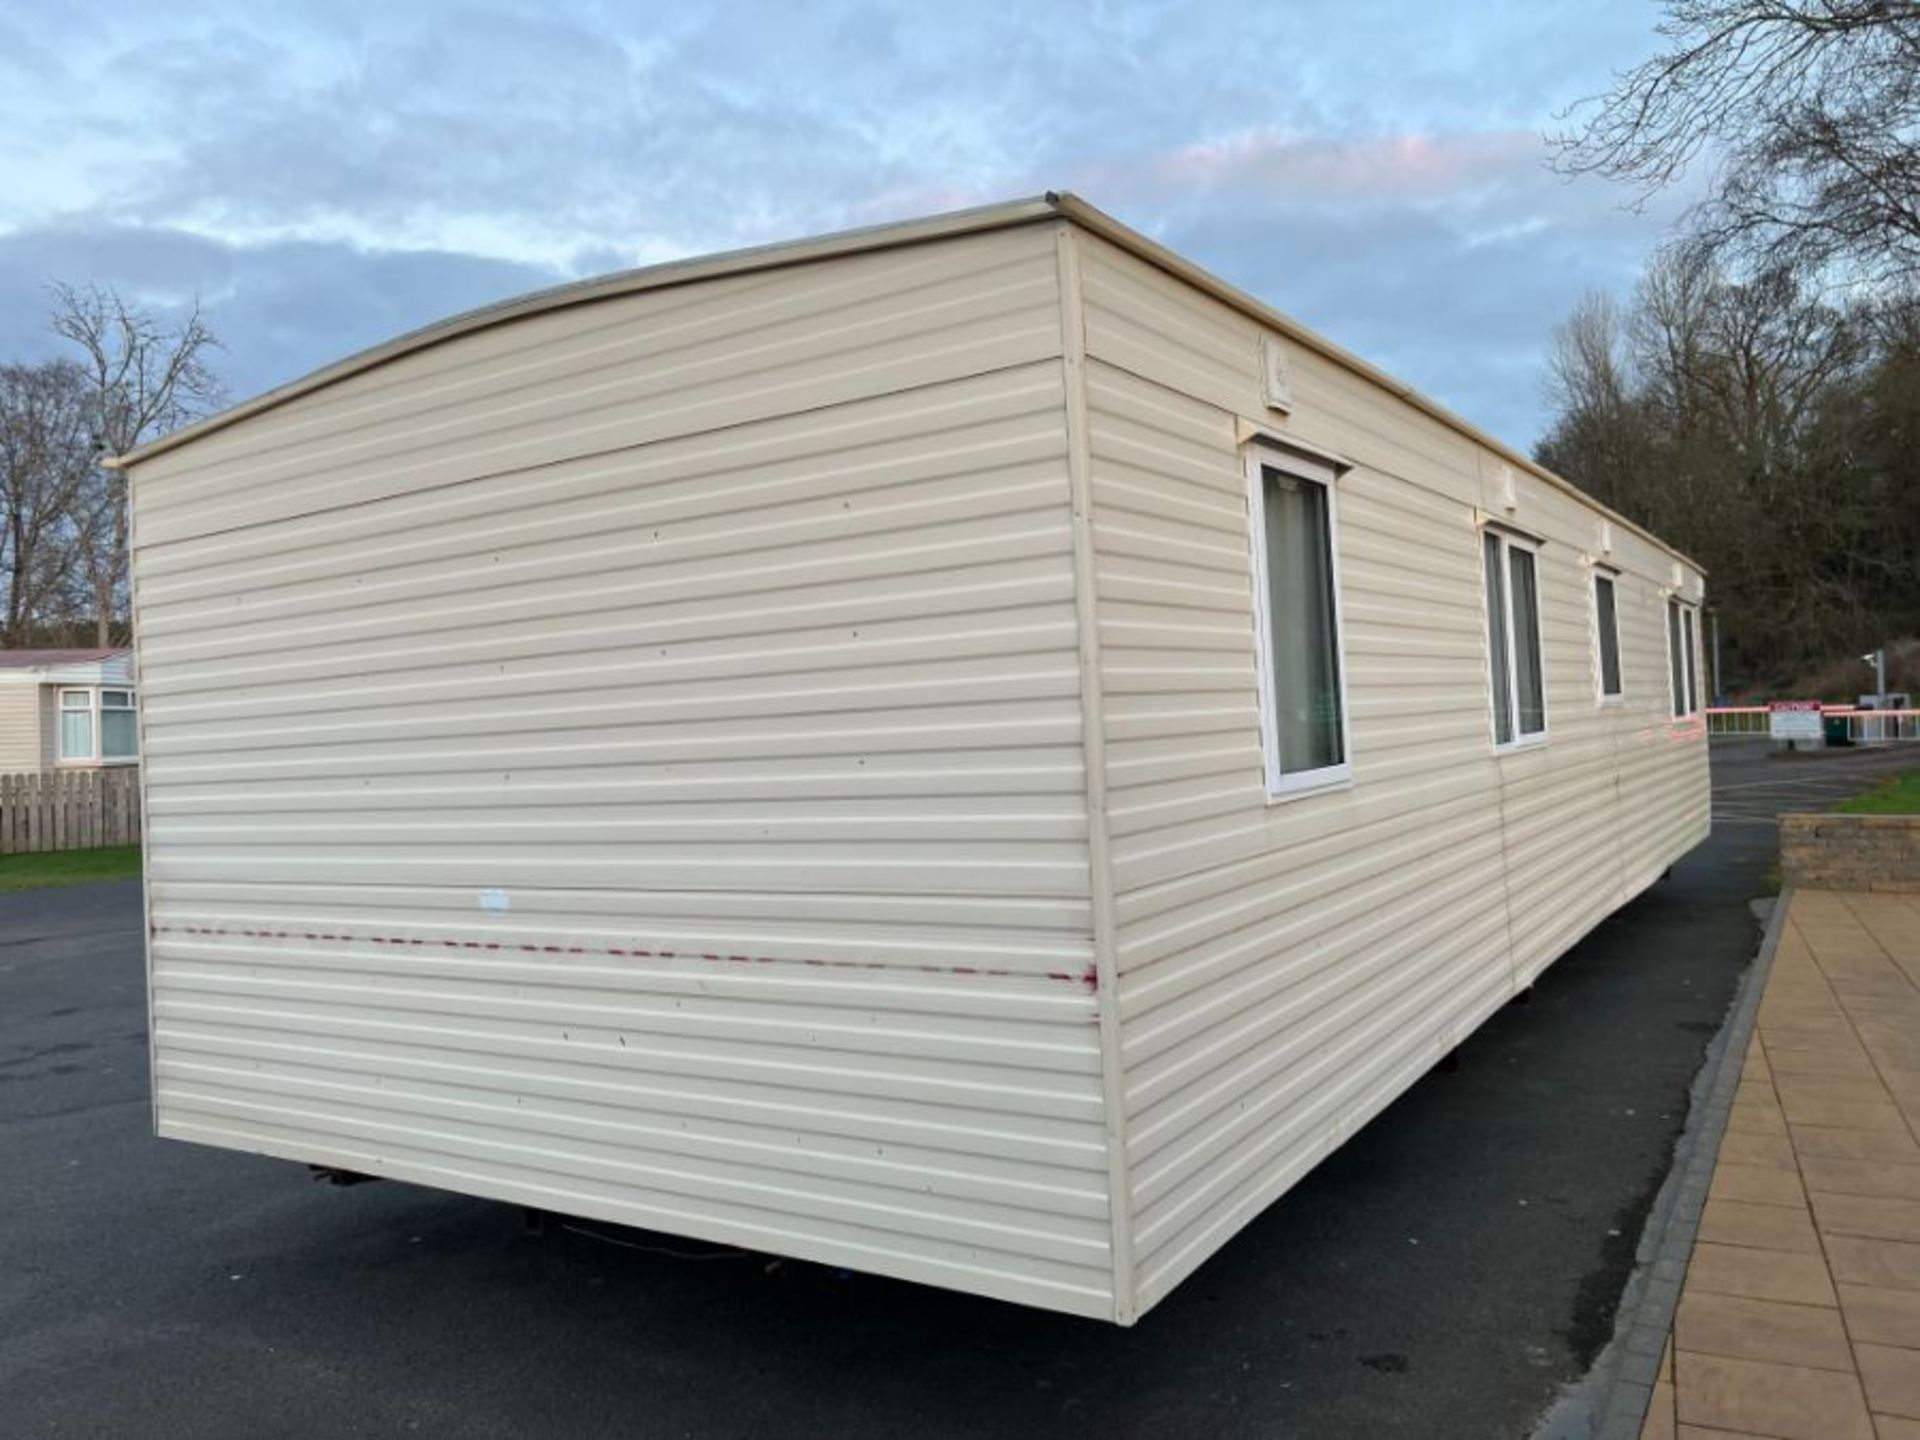 WILLERBY LYNDHURST 37FT X 12FT, 3 BEDROOM STATIC CARAVAN DOUBLE GLAZED & CENTRAL HEATING - LOCATED - Image 27 of 44